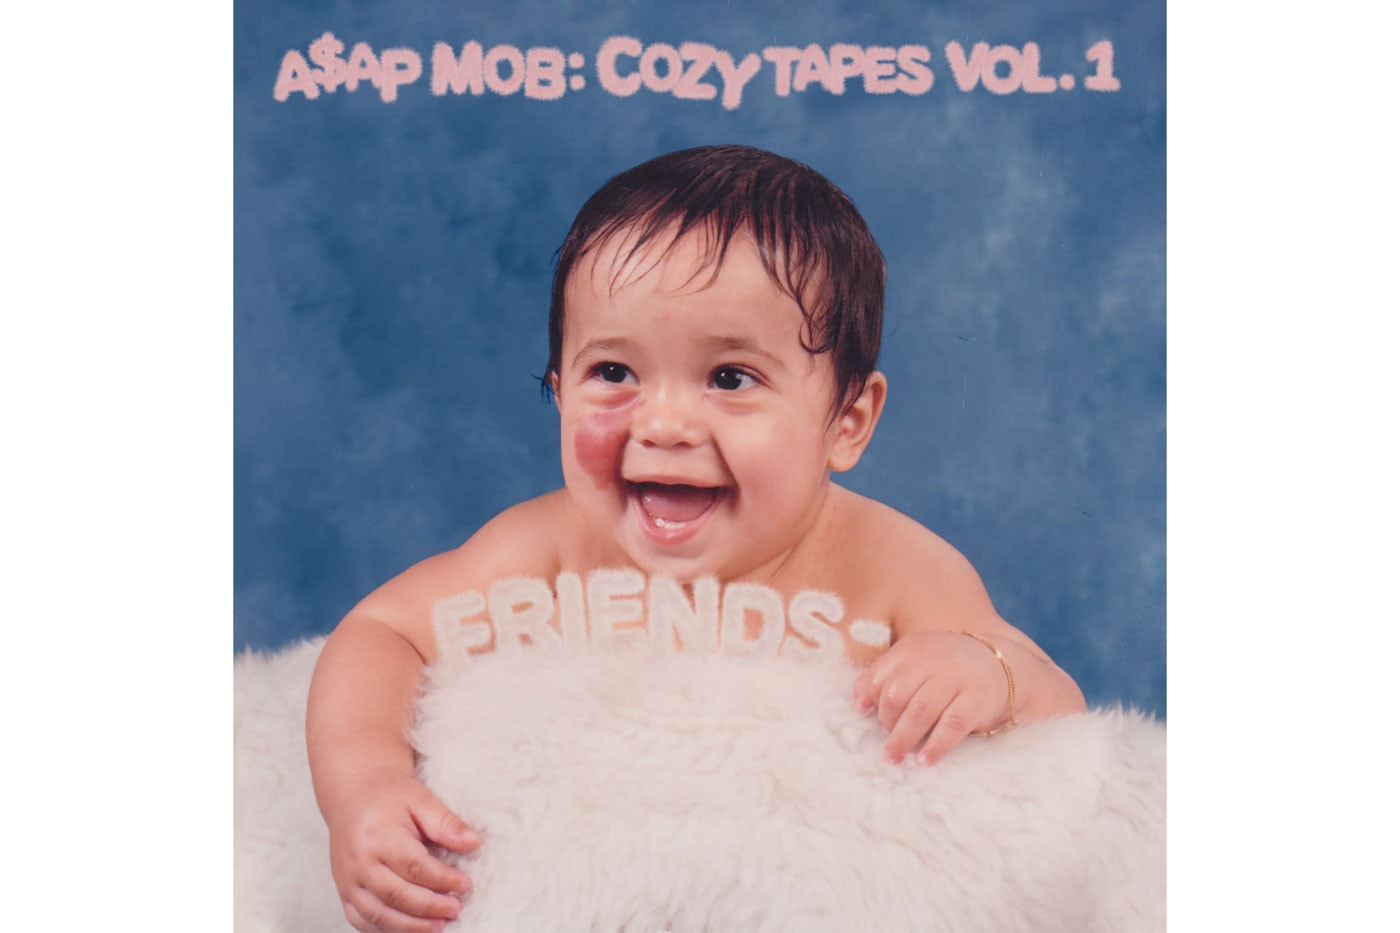 A$AP Mob Cozy Tapes Volume 1 Friends Release Date & Tracklist cover art album yams rocky ferg picture